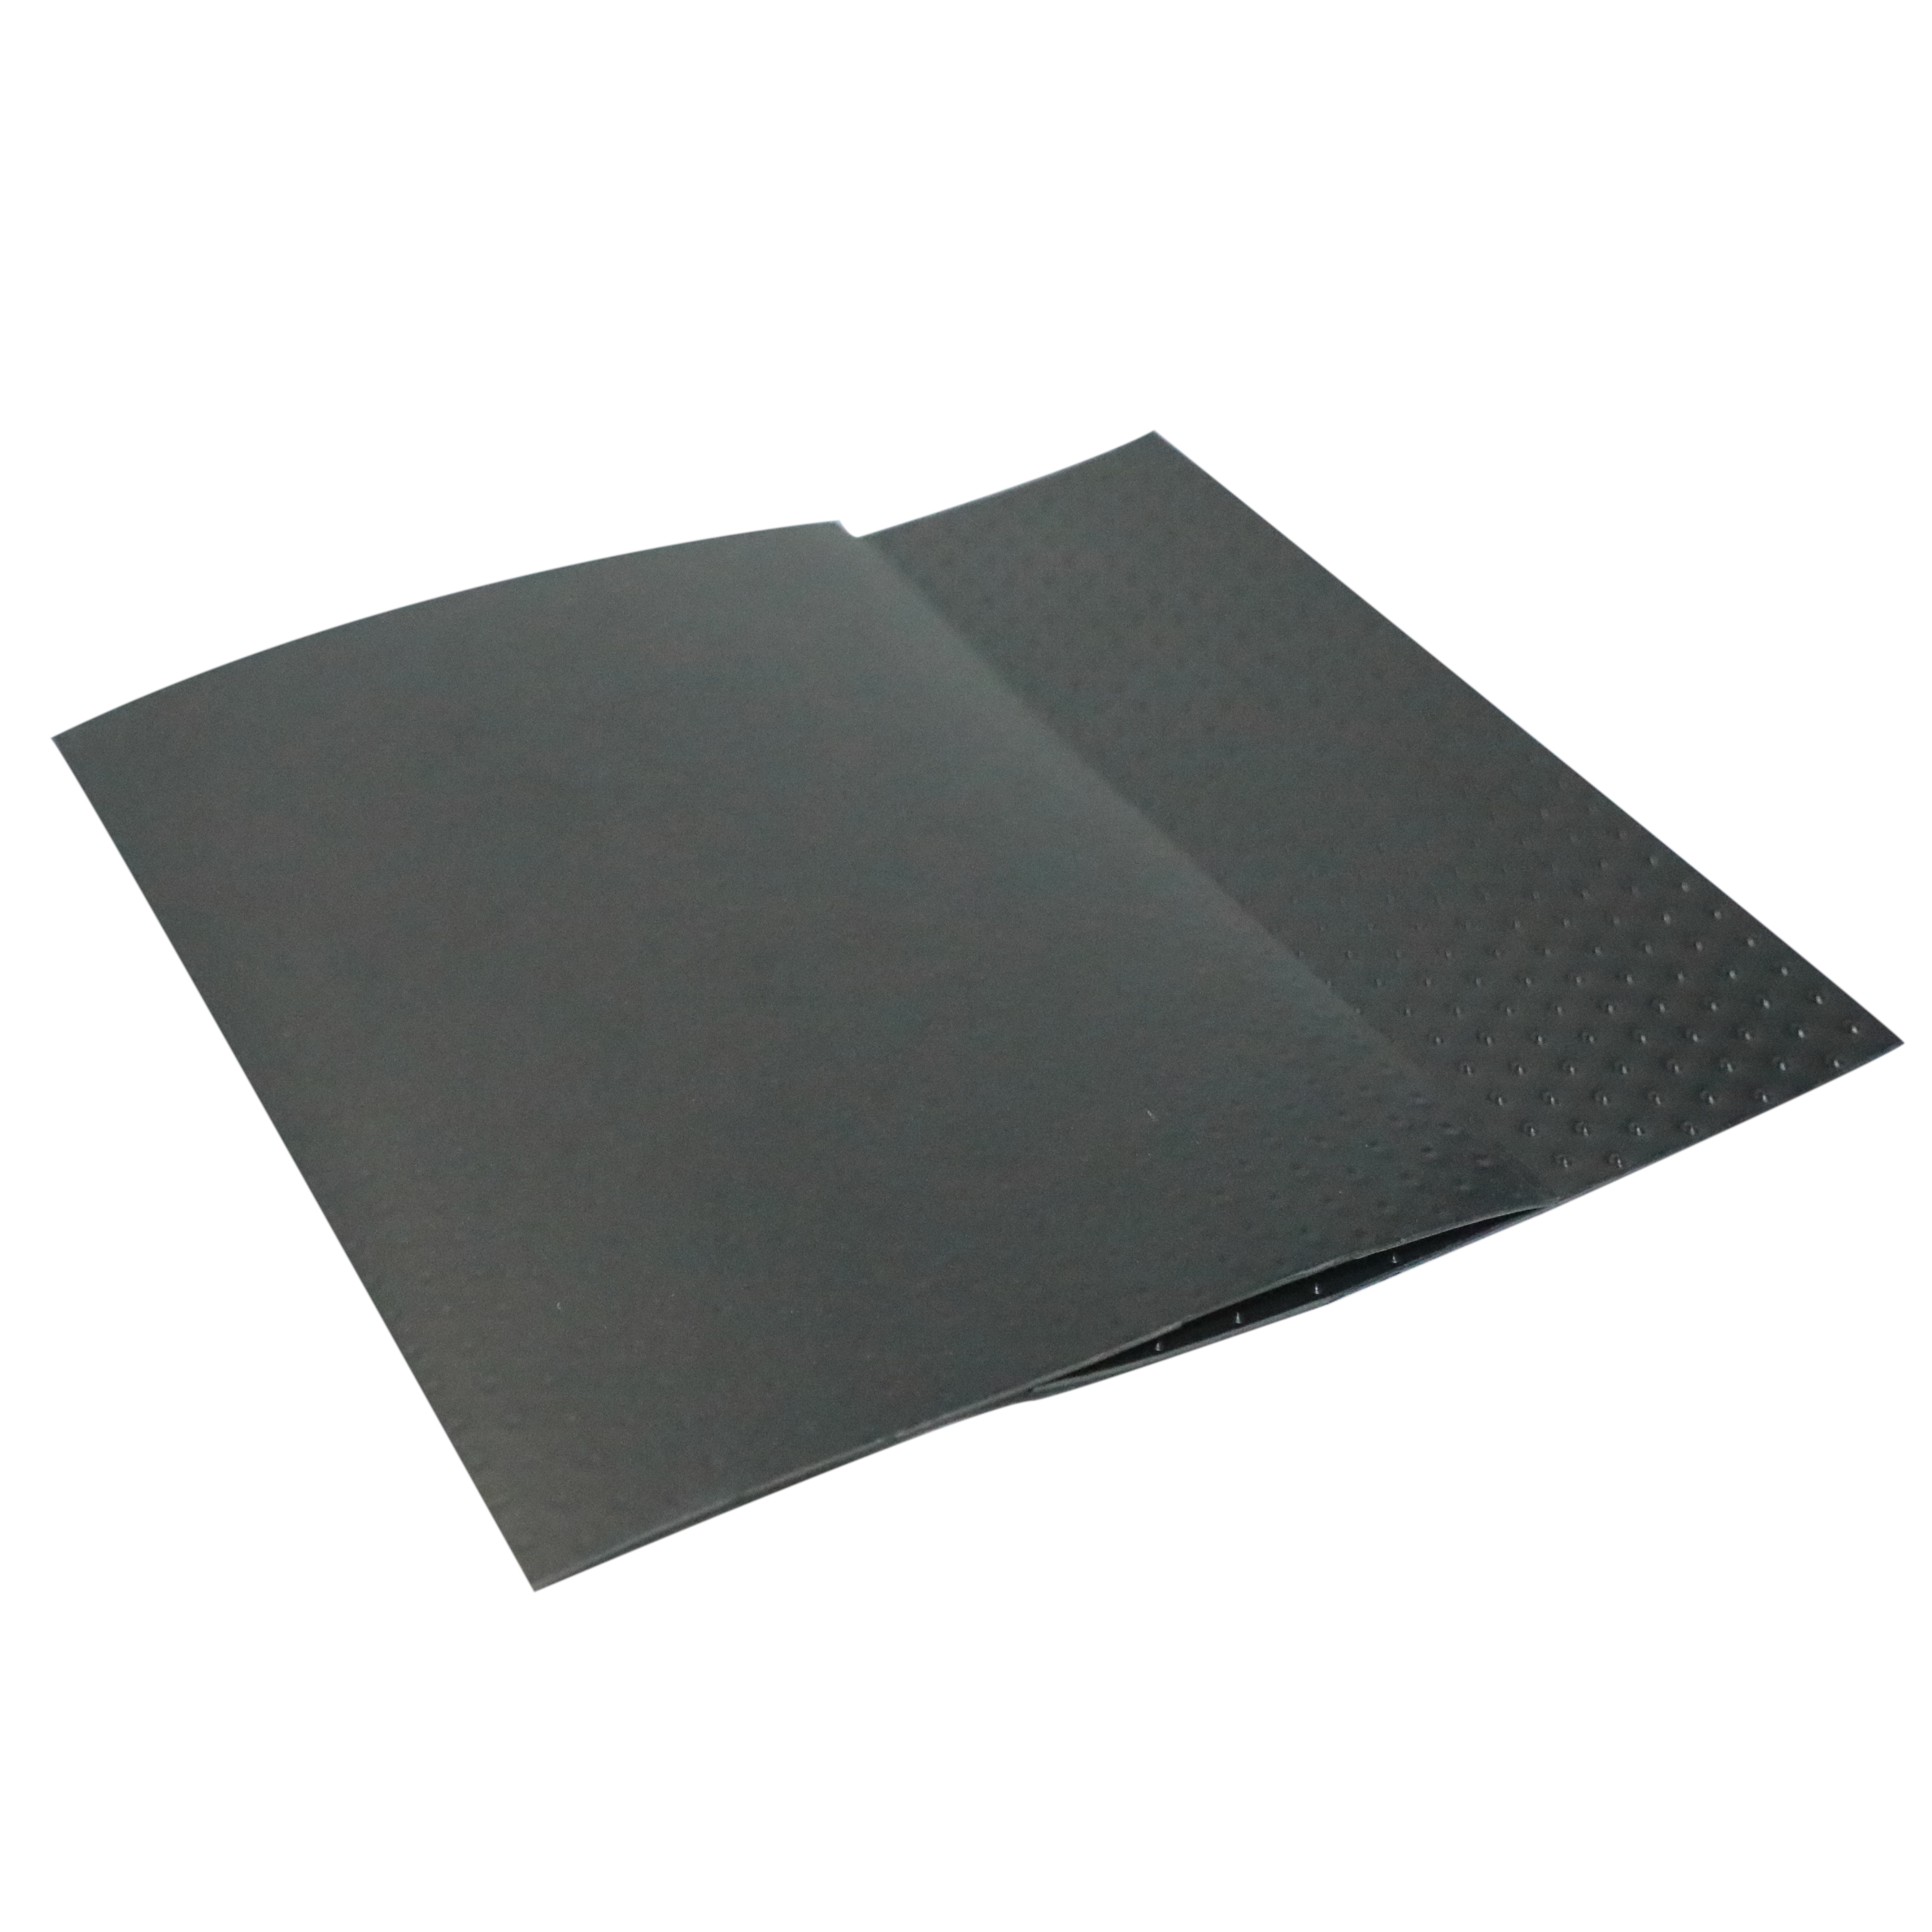 HDPE LDPE Waterproof Geomembrane Manufacturers Fish Farm Plastic Pond Liner for Aquaculture